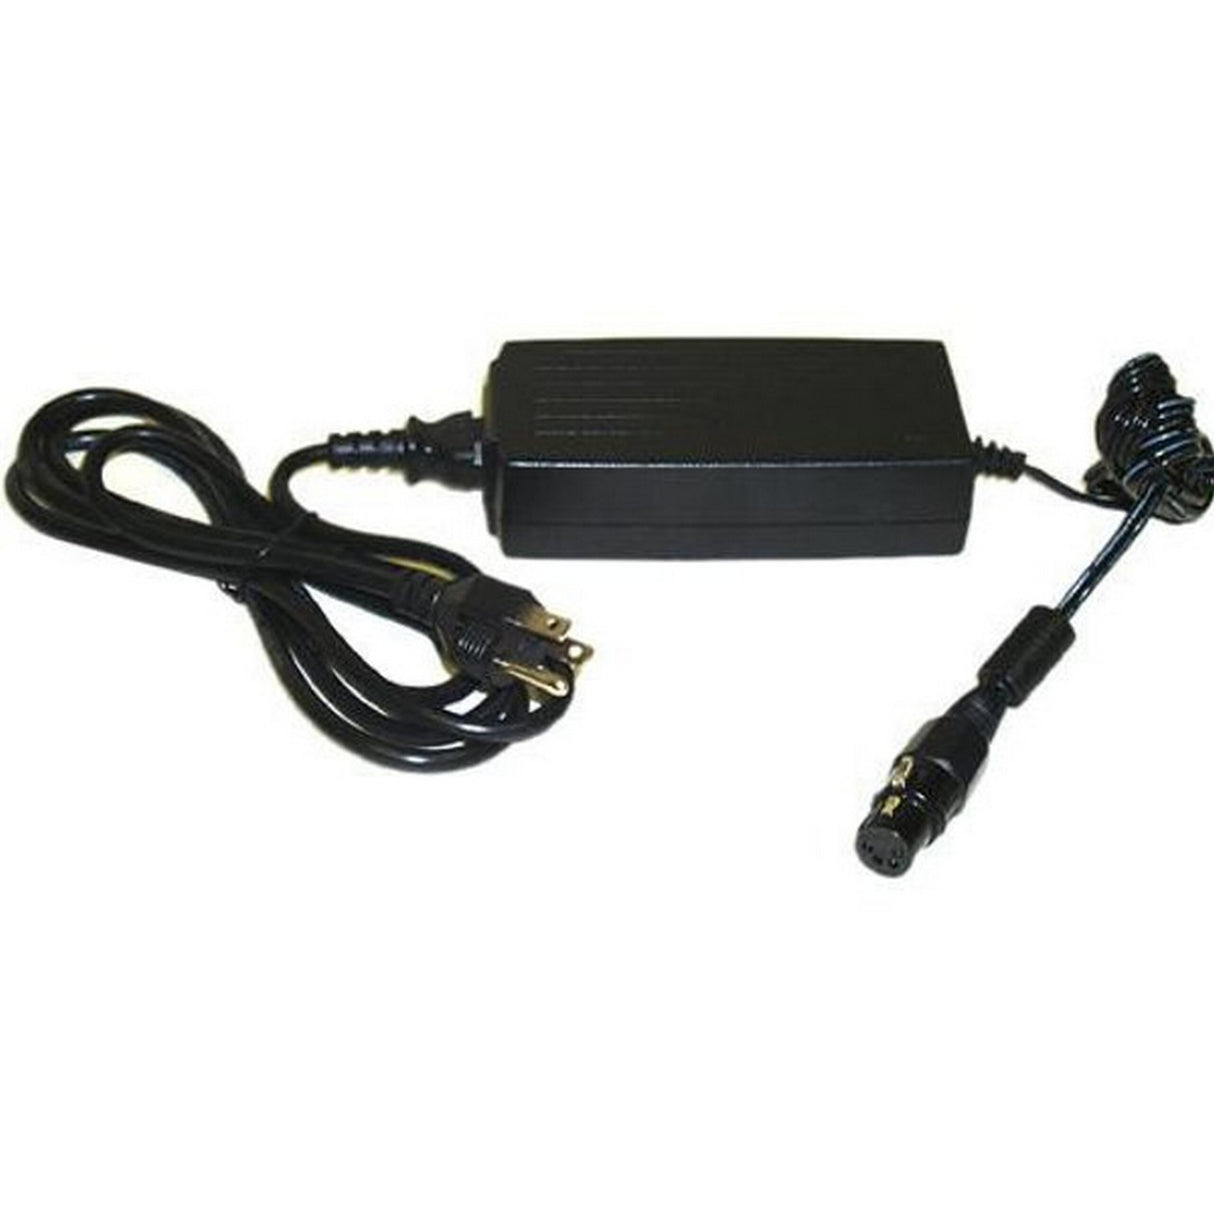 Bescor PSA-124 12V/5A Power Supply with 4-Pin XLR Output